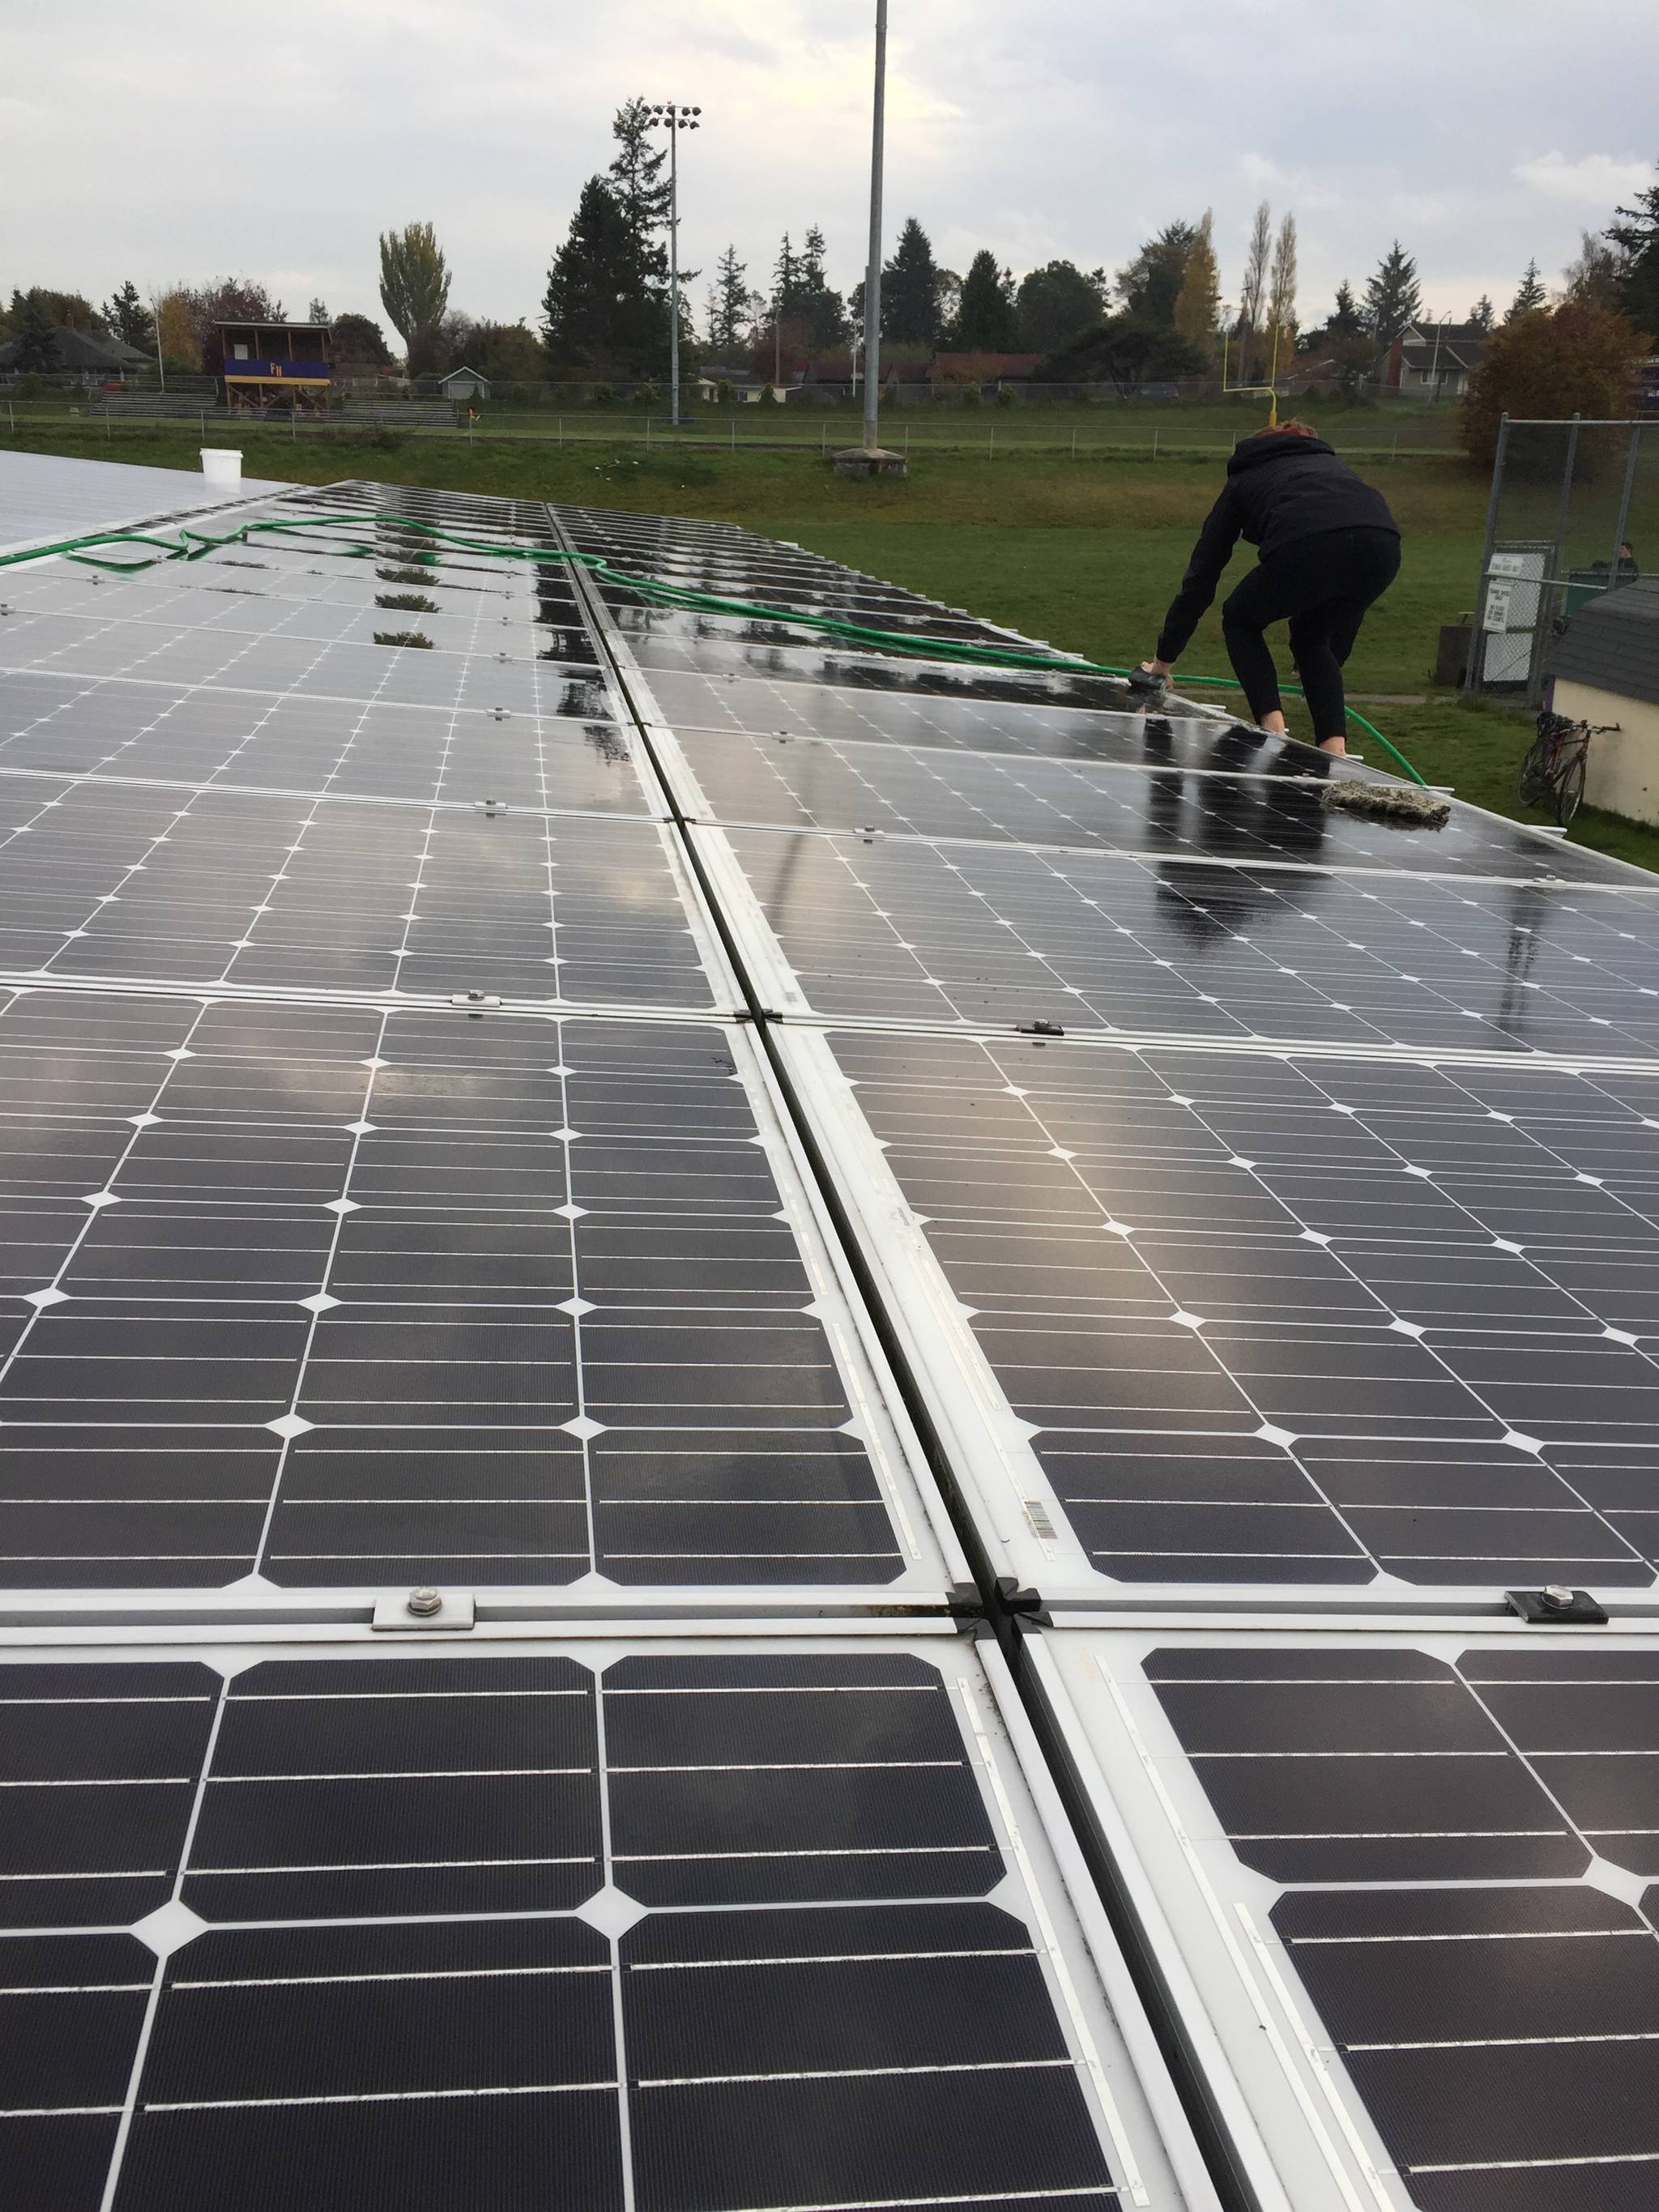 Contributed photo                                Rachel and Molly cleaned the STEM building’s solar panels as part of their community project.